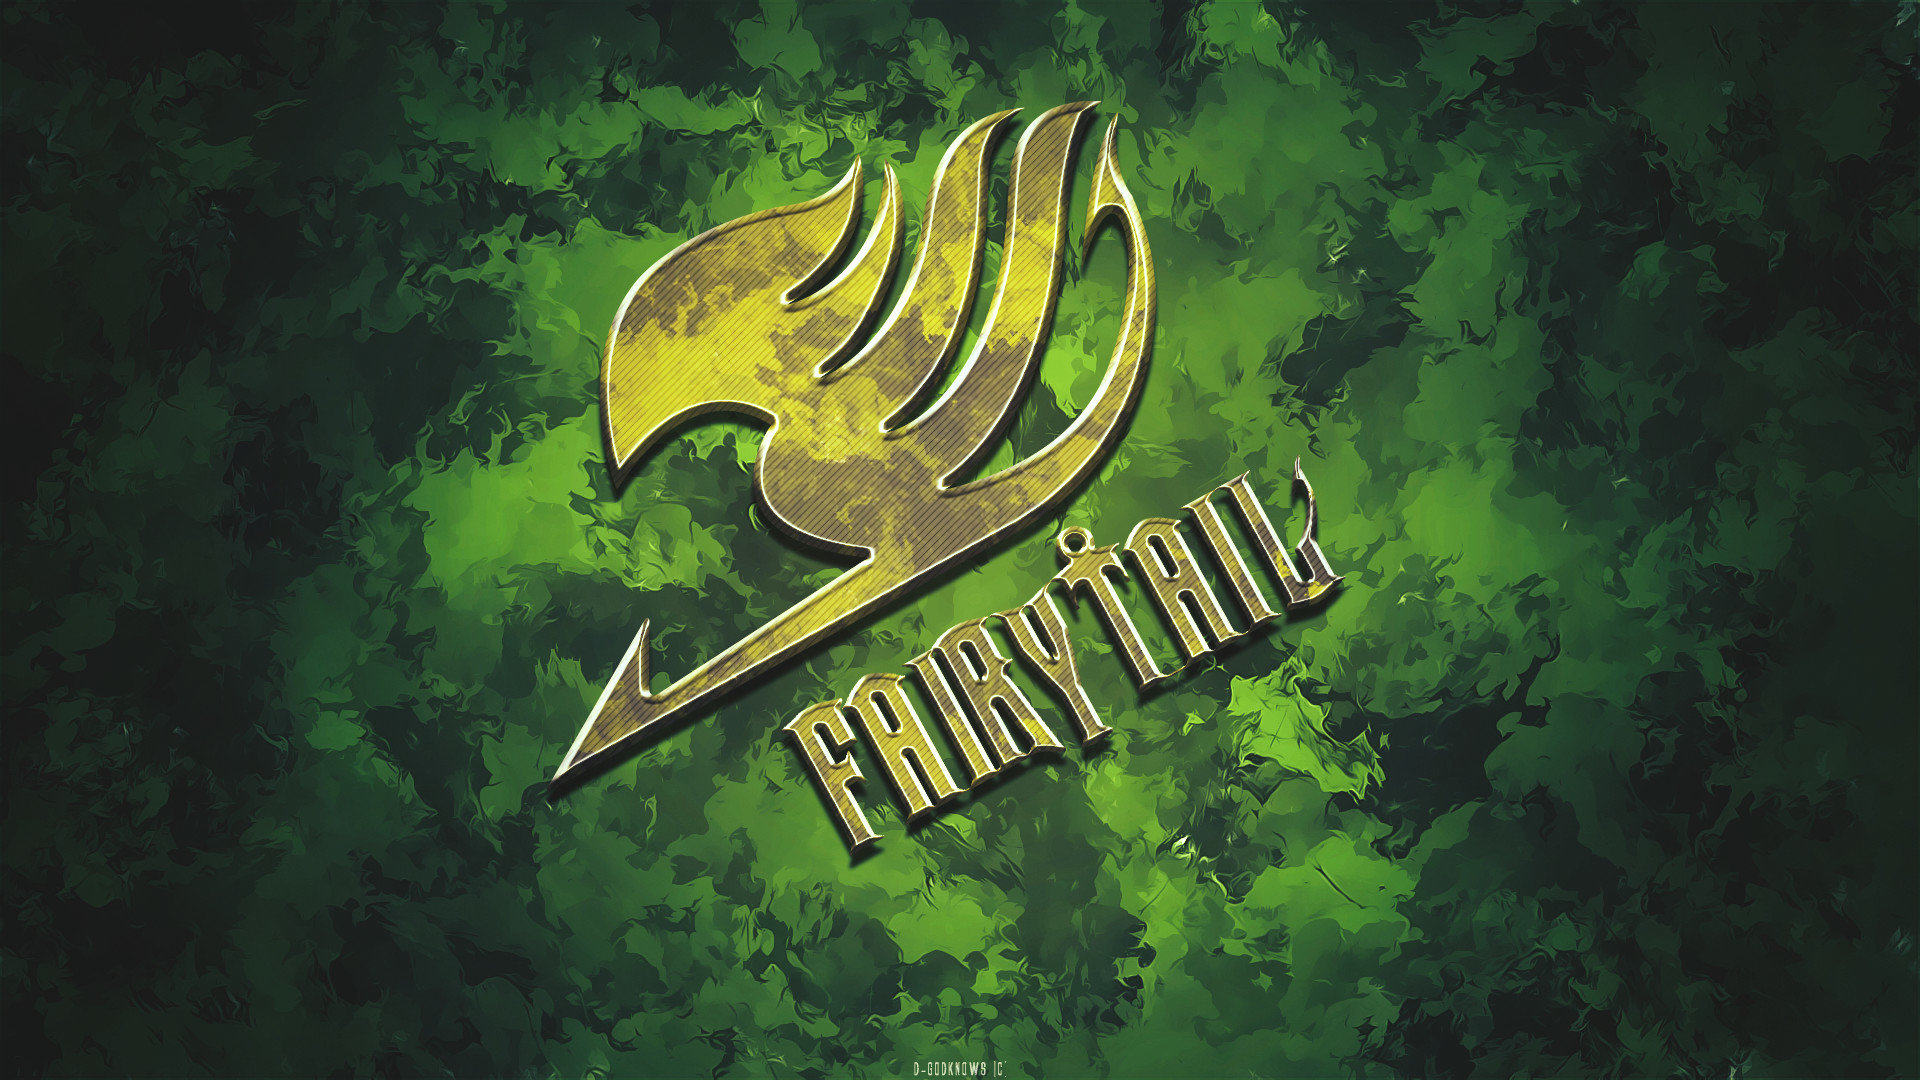 Fairy Tail wallpapers 1920x1080 Full HD.